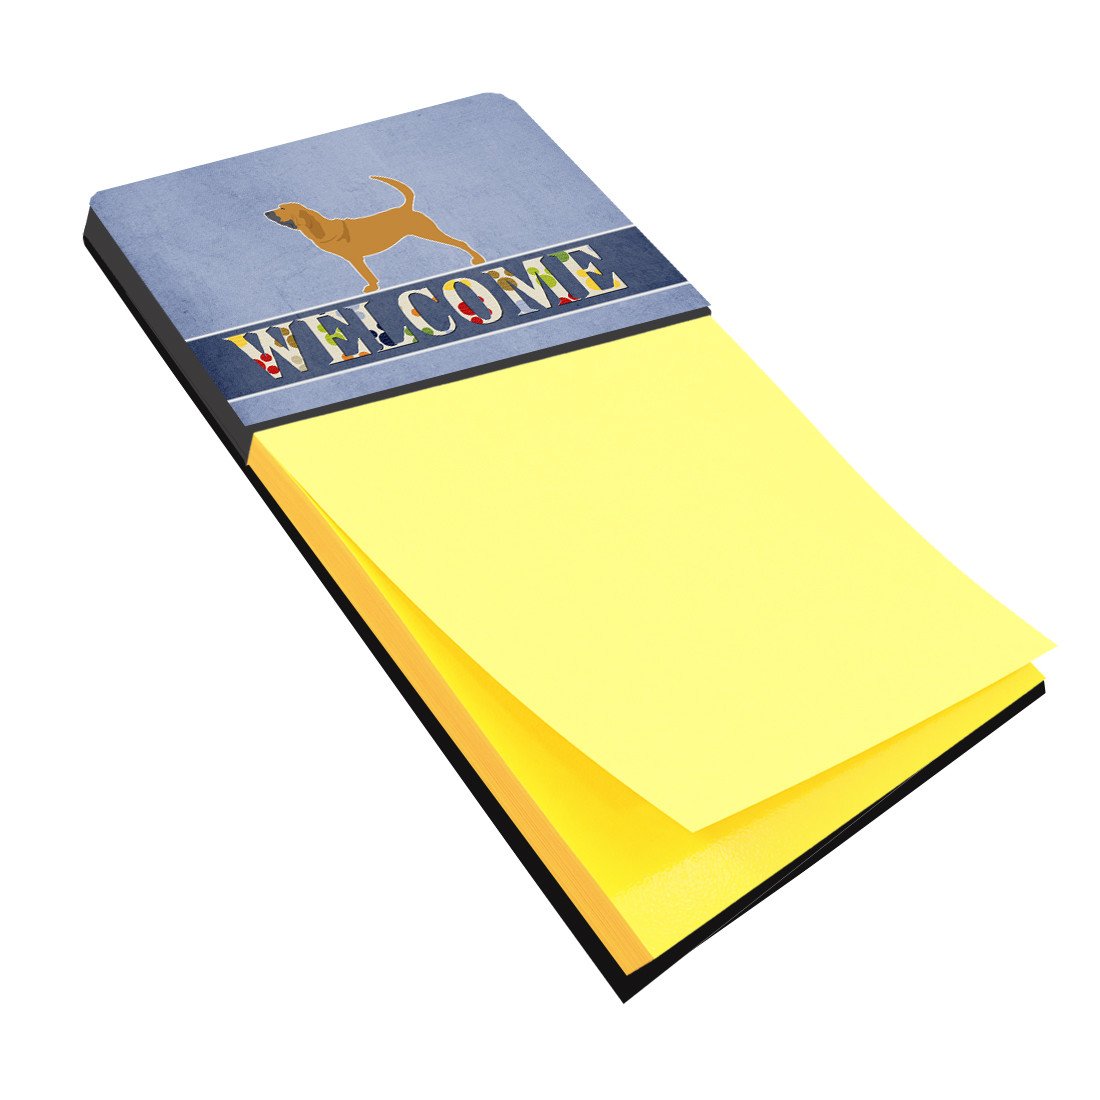 Bloodhound Welcome Sticky Note Holder BB5488SN by Caroline's Treasures